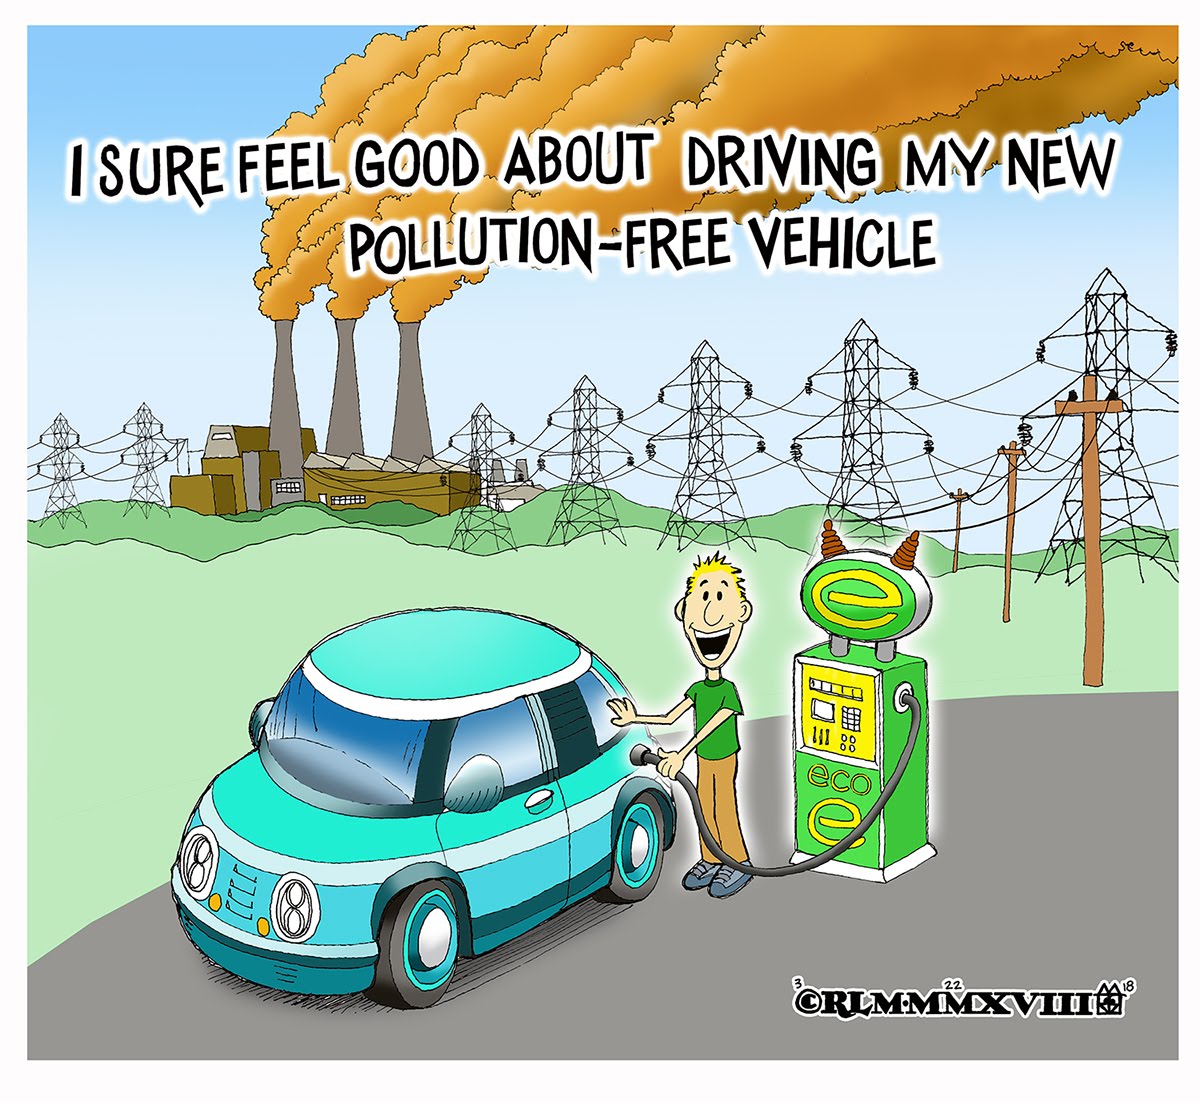 POLLUTION FREE